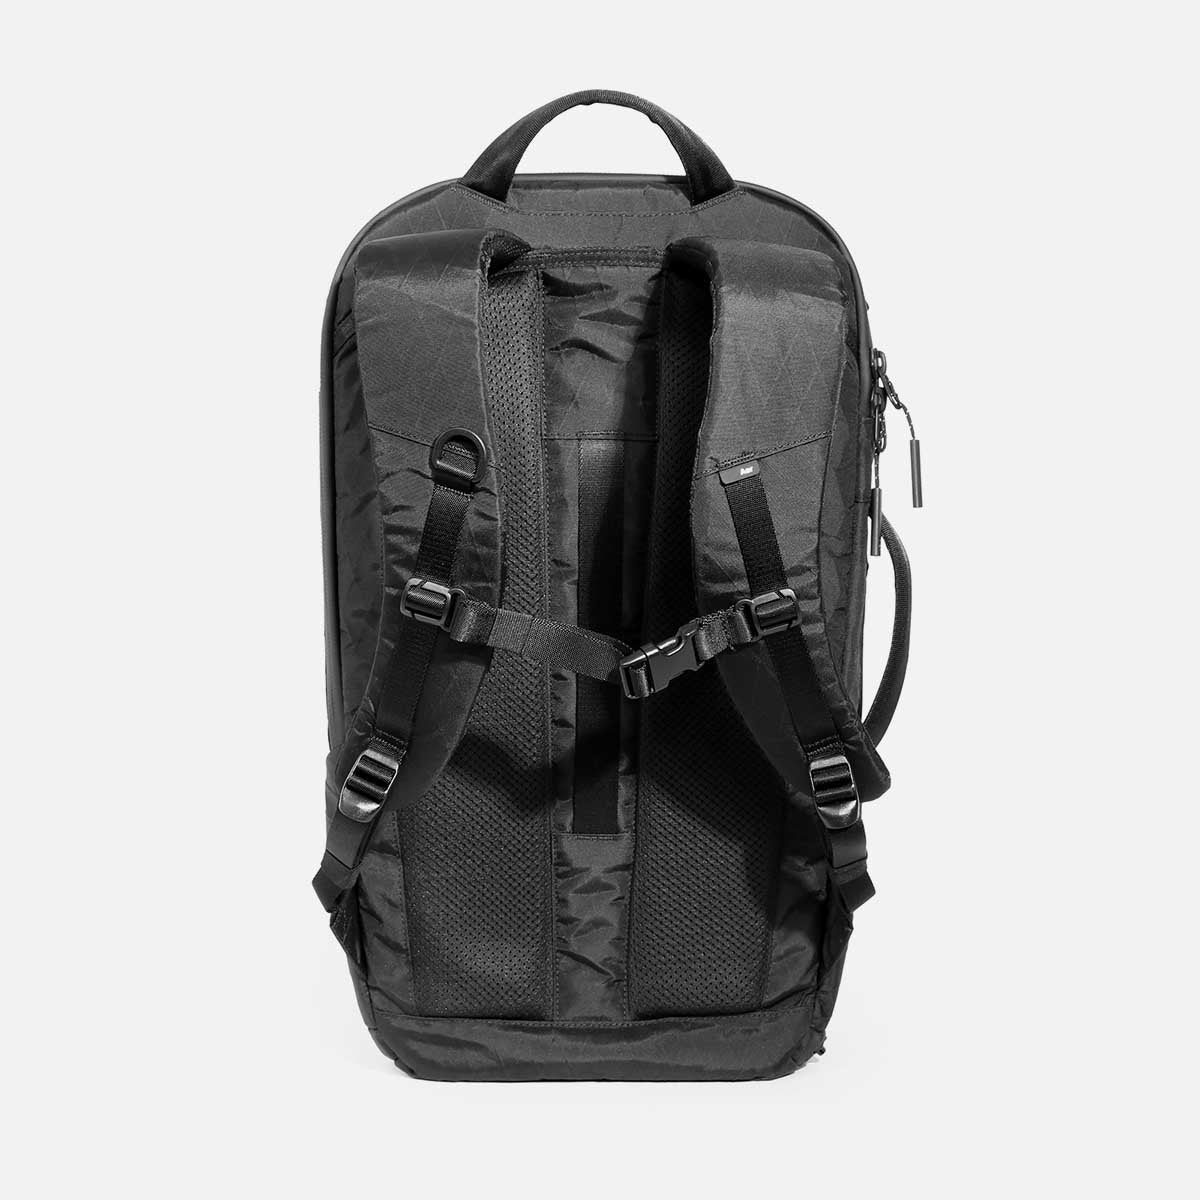 Aer Duffel Pack 3 (X-Pac) laptop backpacks for travel – Mined